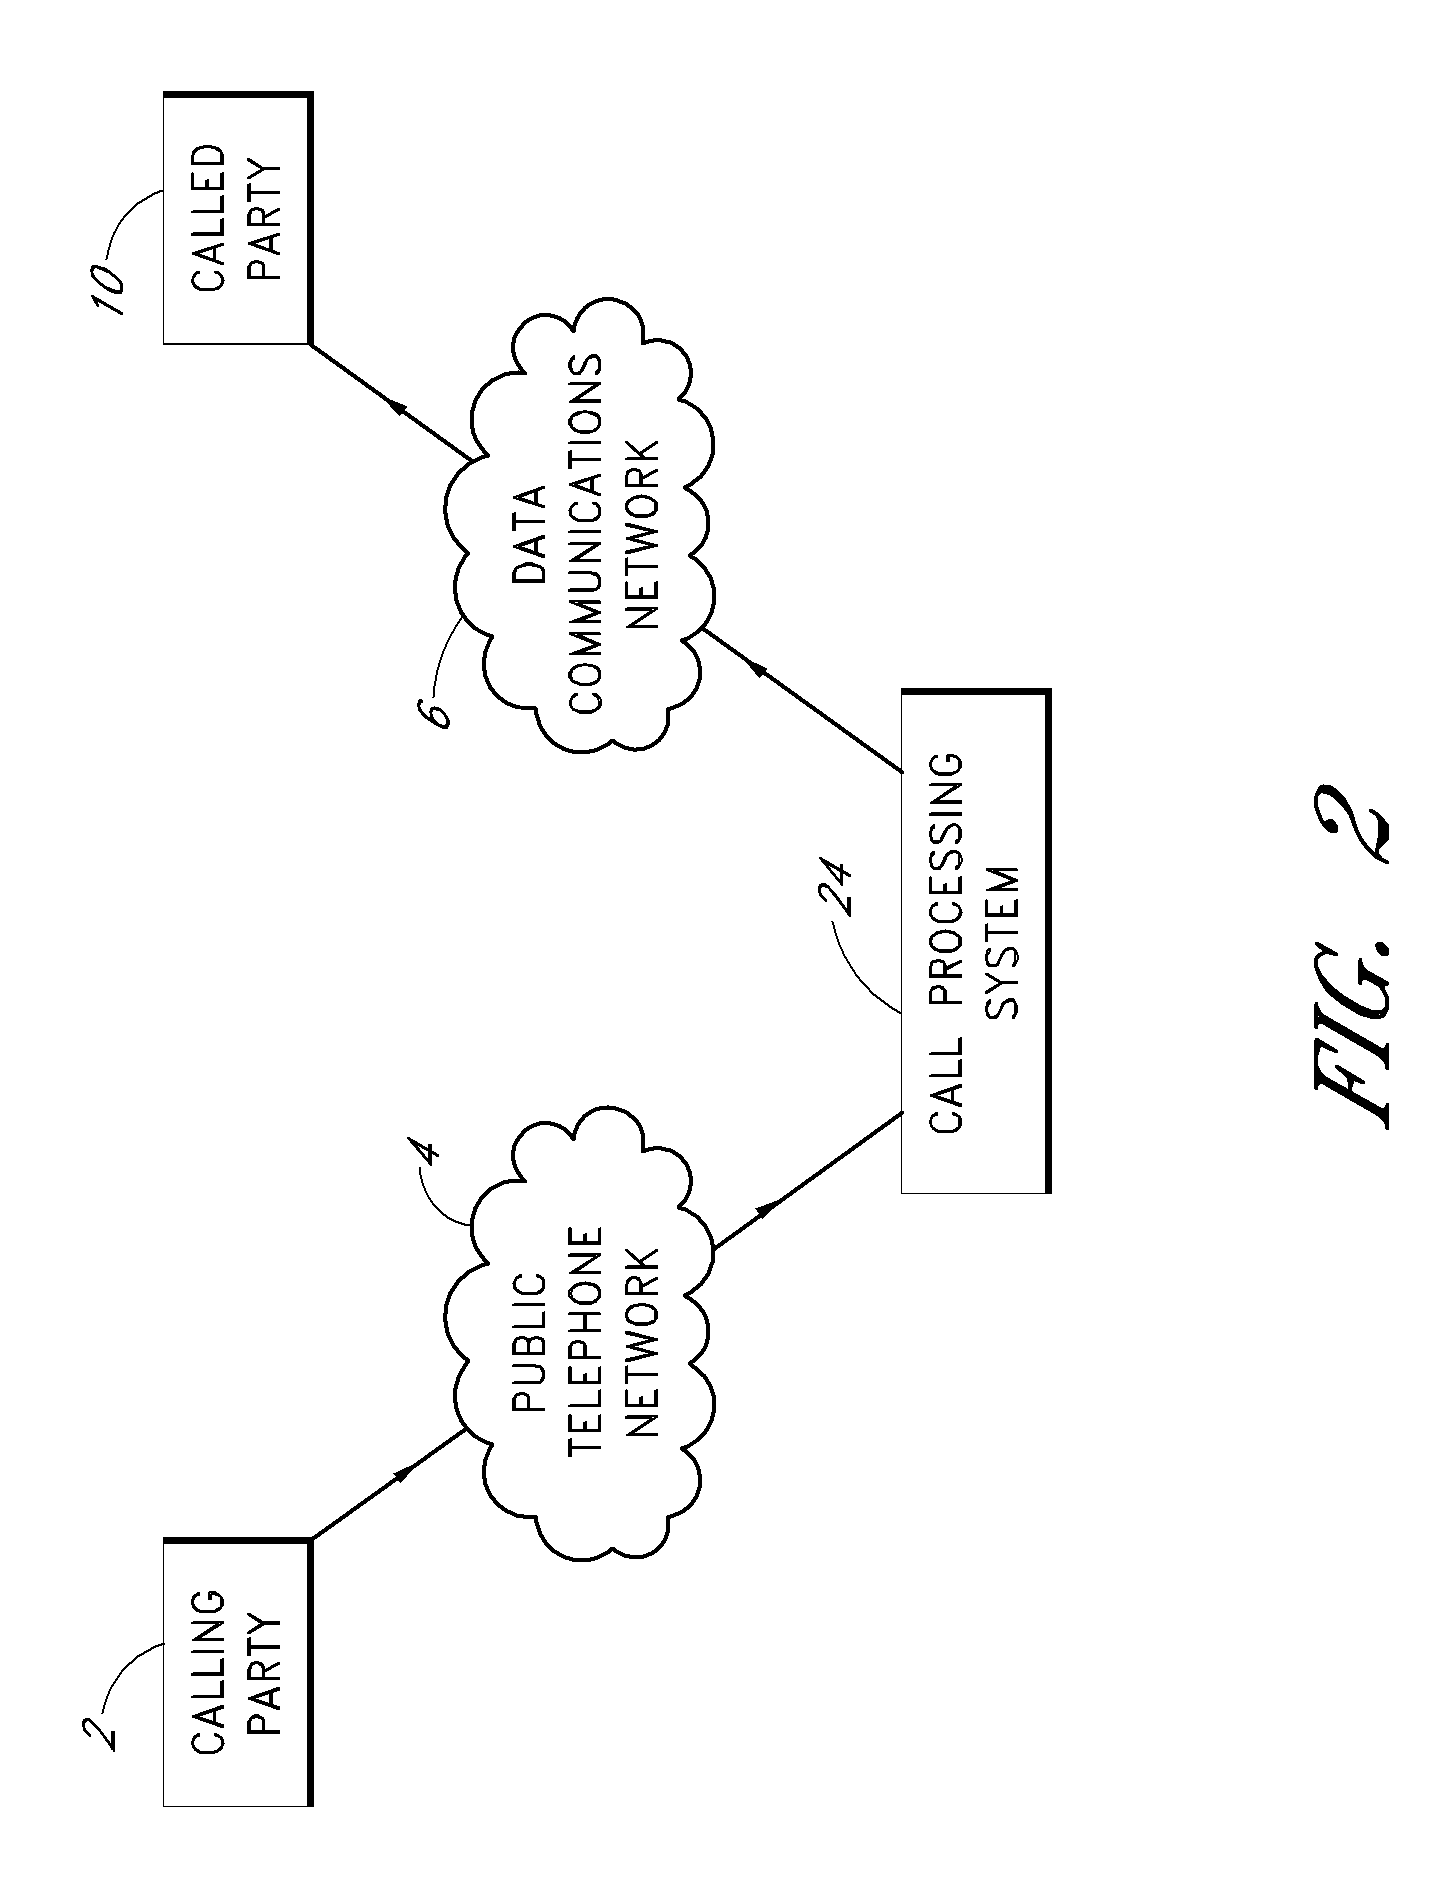 Enhanced service levels for call-processing services